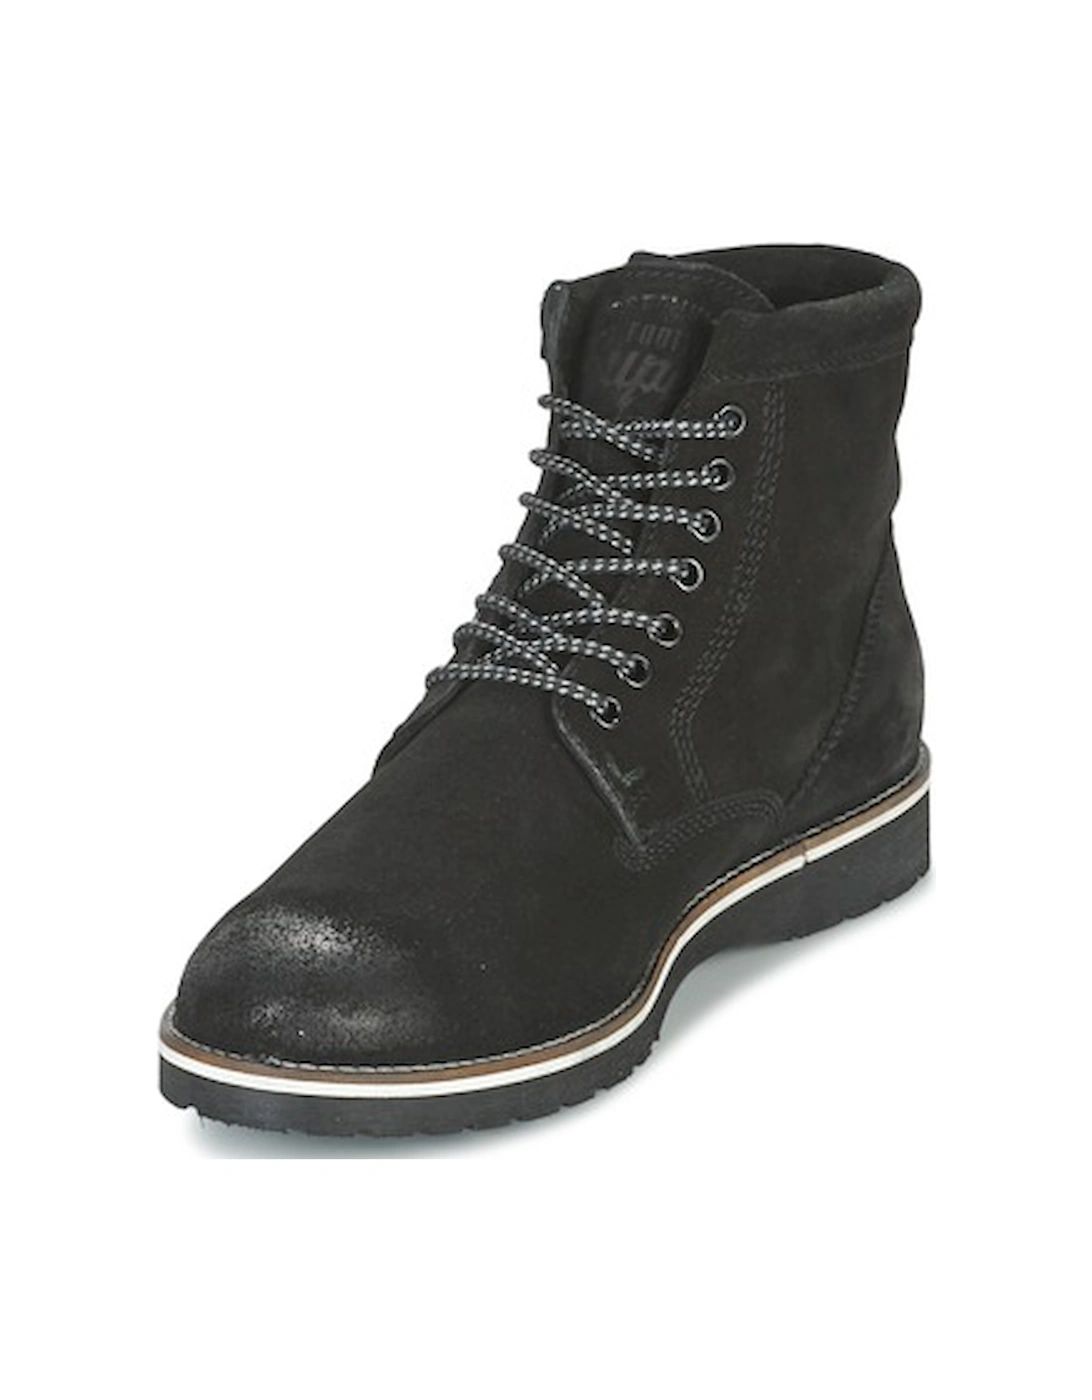 STIRLING BOOT